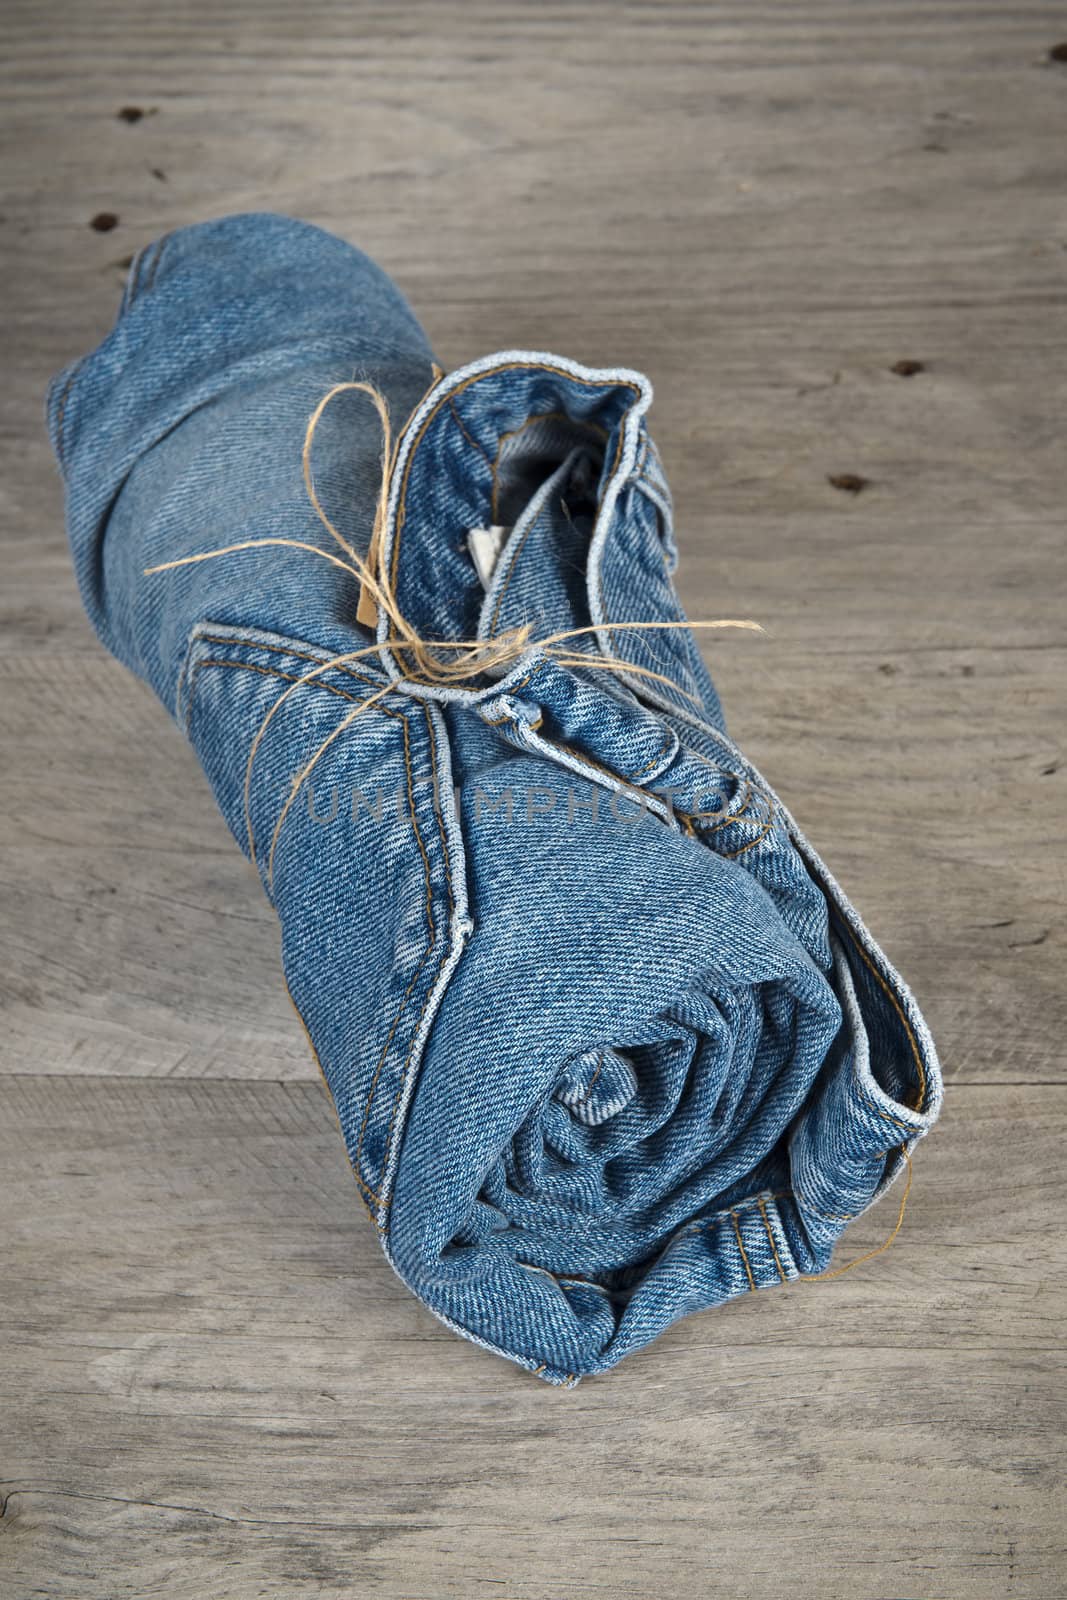 Rolled jeans arranged in a pyramid  by angelsimon